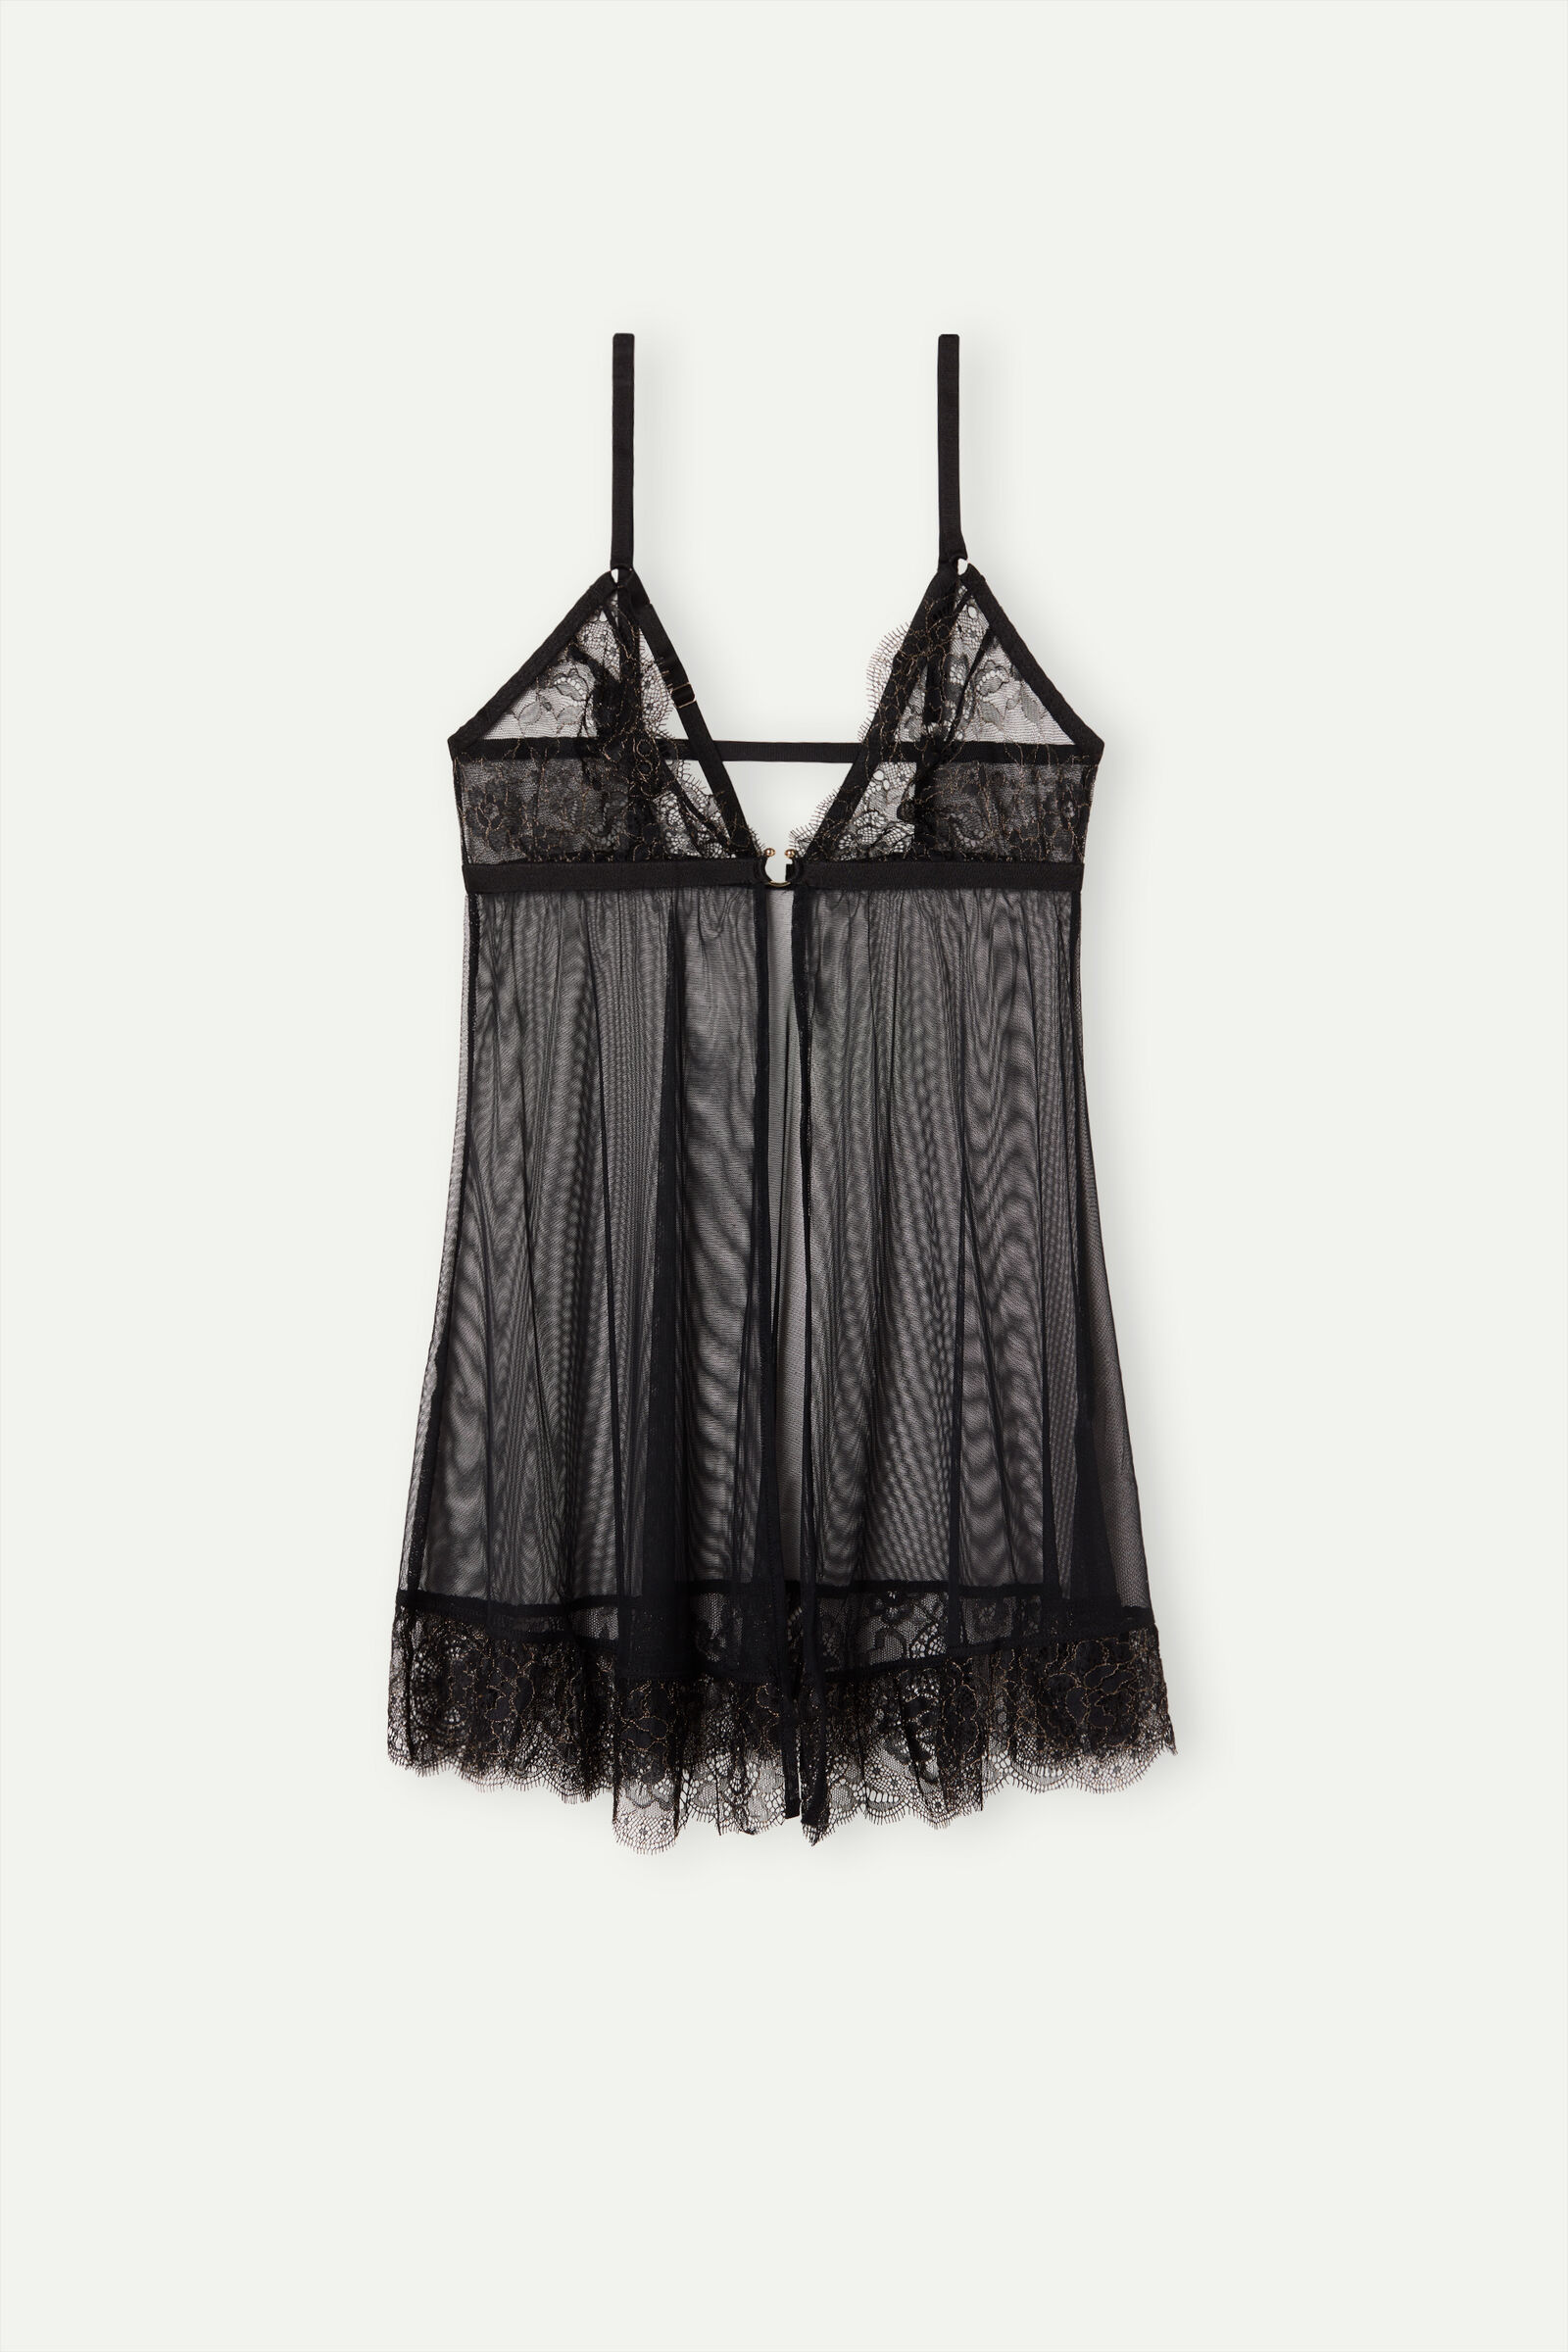 Your Private Party Tulle Babydoll | Intimissimi